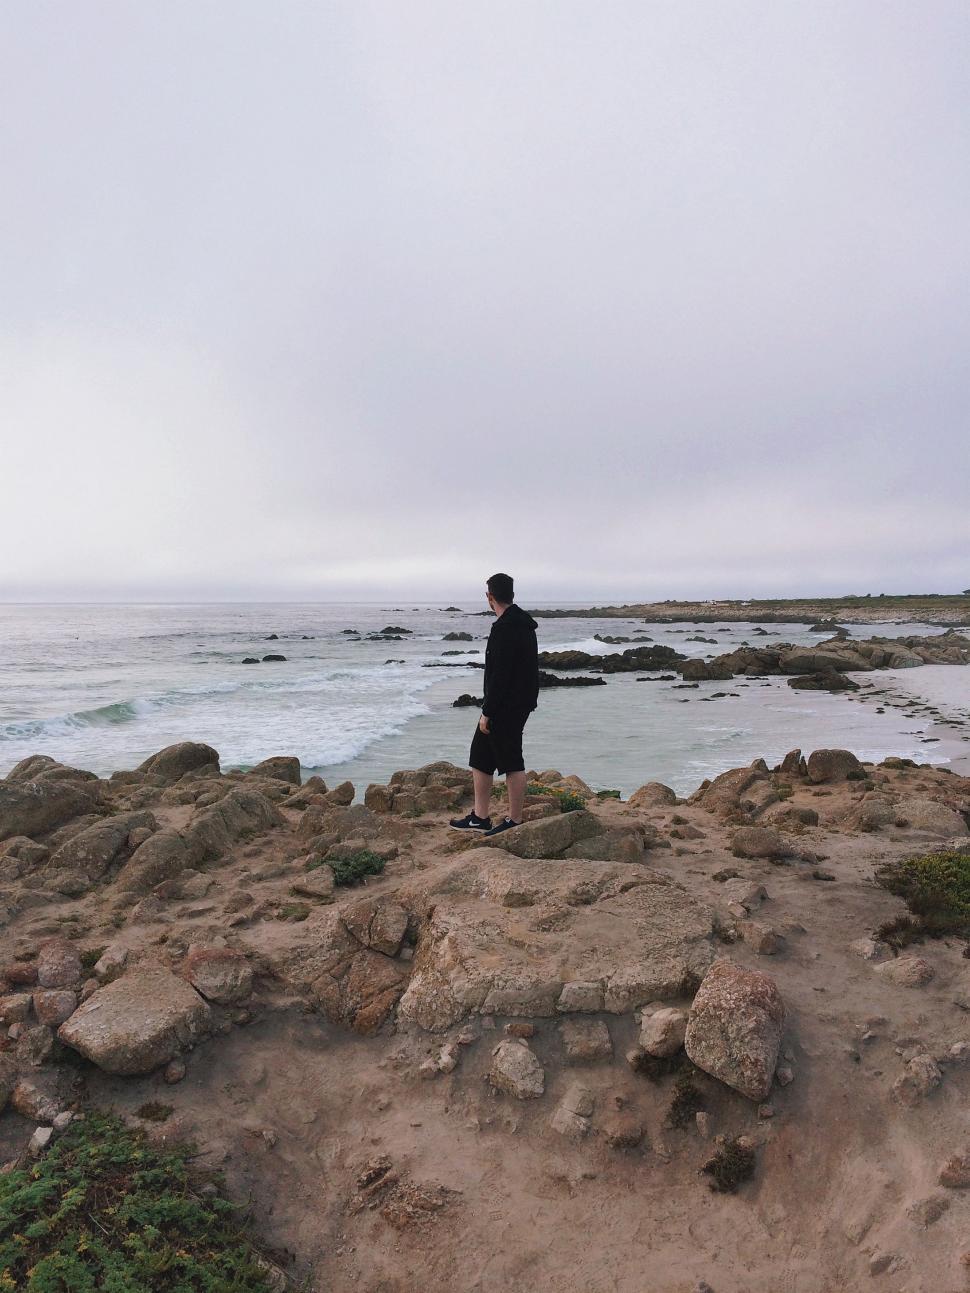 Free Image of Man Standing on Rocky Beach by Ocean 